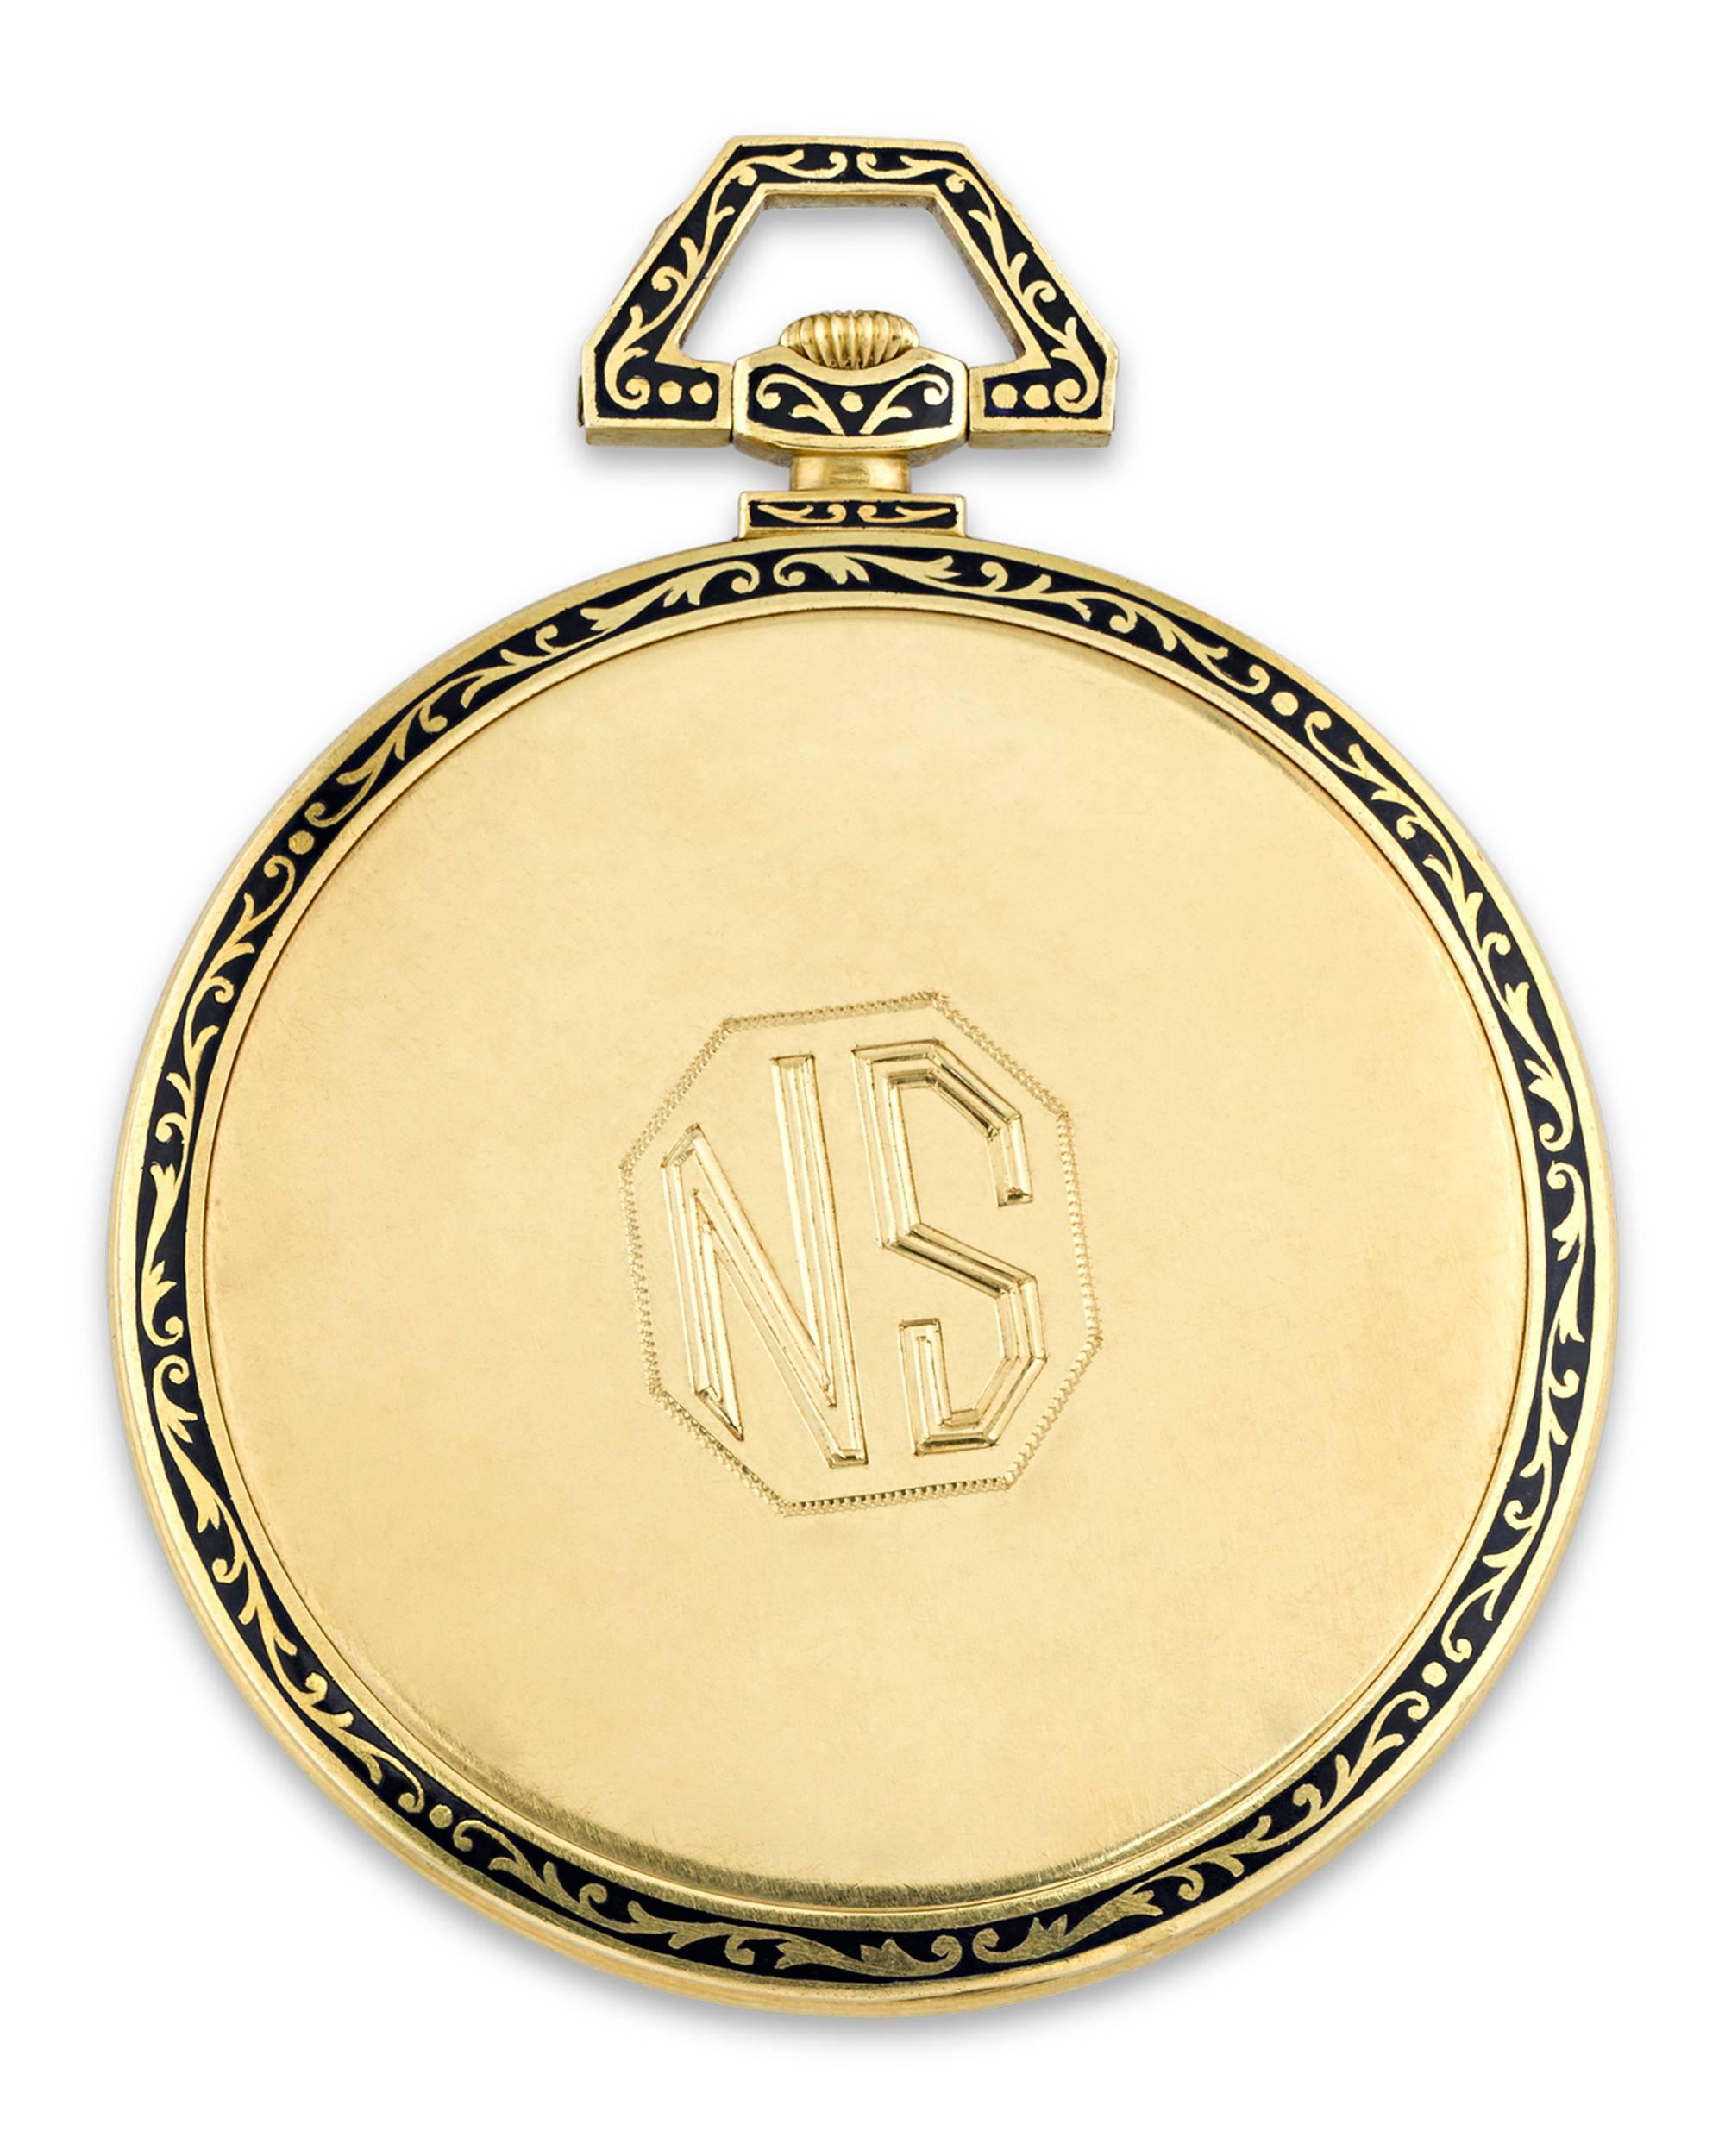 This handsome Art Deco-period pocket watch was created by a firm considered to be the leader in "haute horology", Audemars Piguet of Le Brassus, Switzerland. Retailed by E. Gübelin of Lucerne, this fantastic, open-faced timepiece is housed